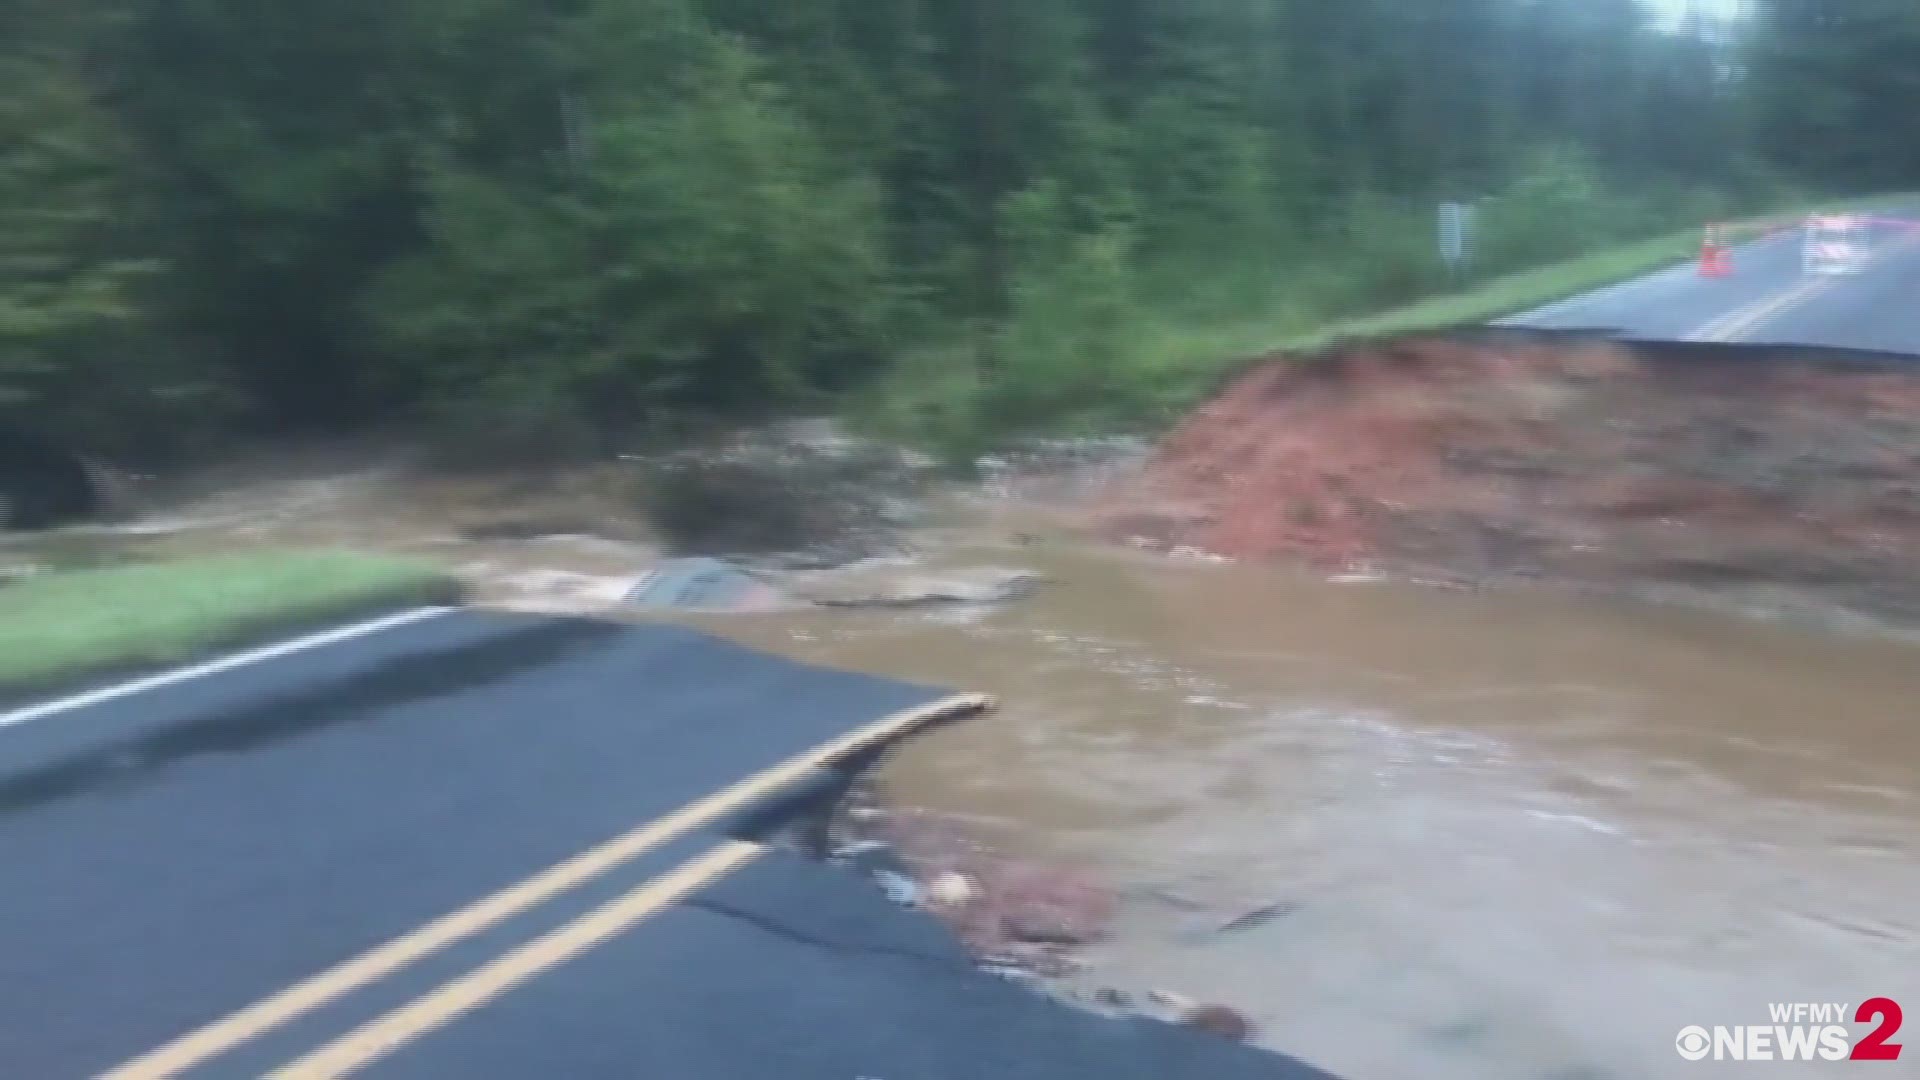 Clyde King road In Seagrove collapses.